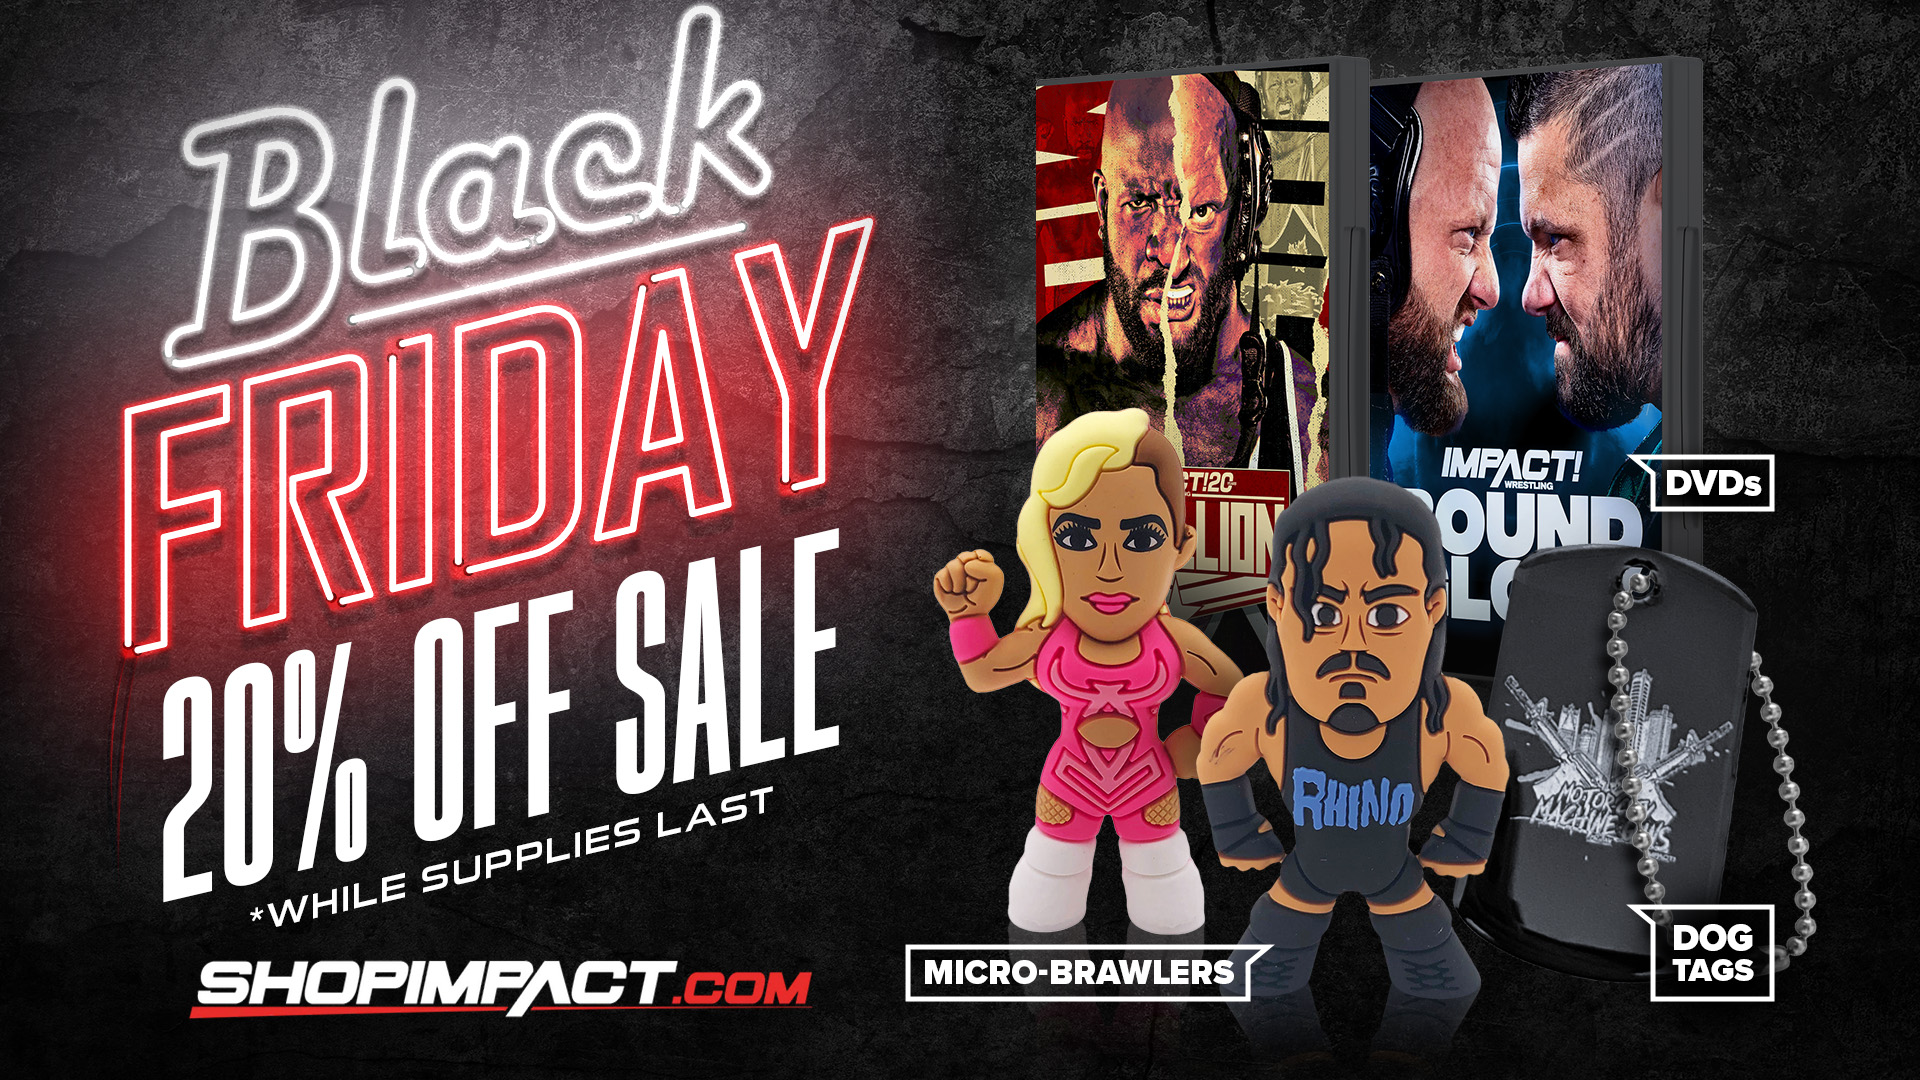 Black Friday Sale on Now at ShopIMPACT.com – IMPACT Wrestling